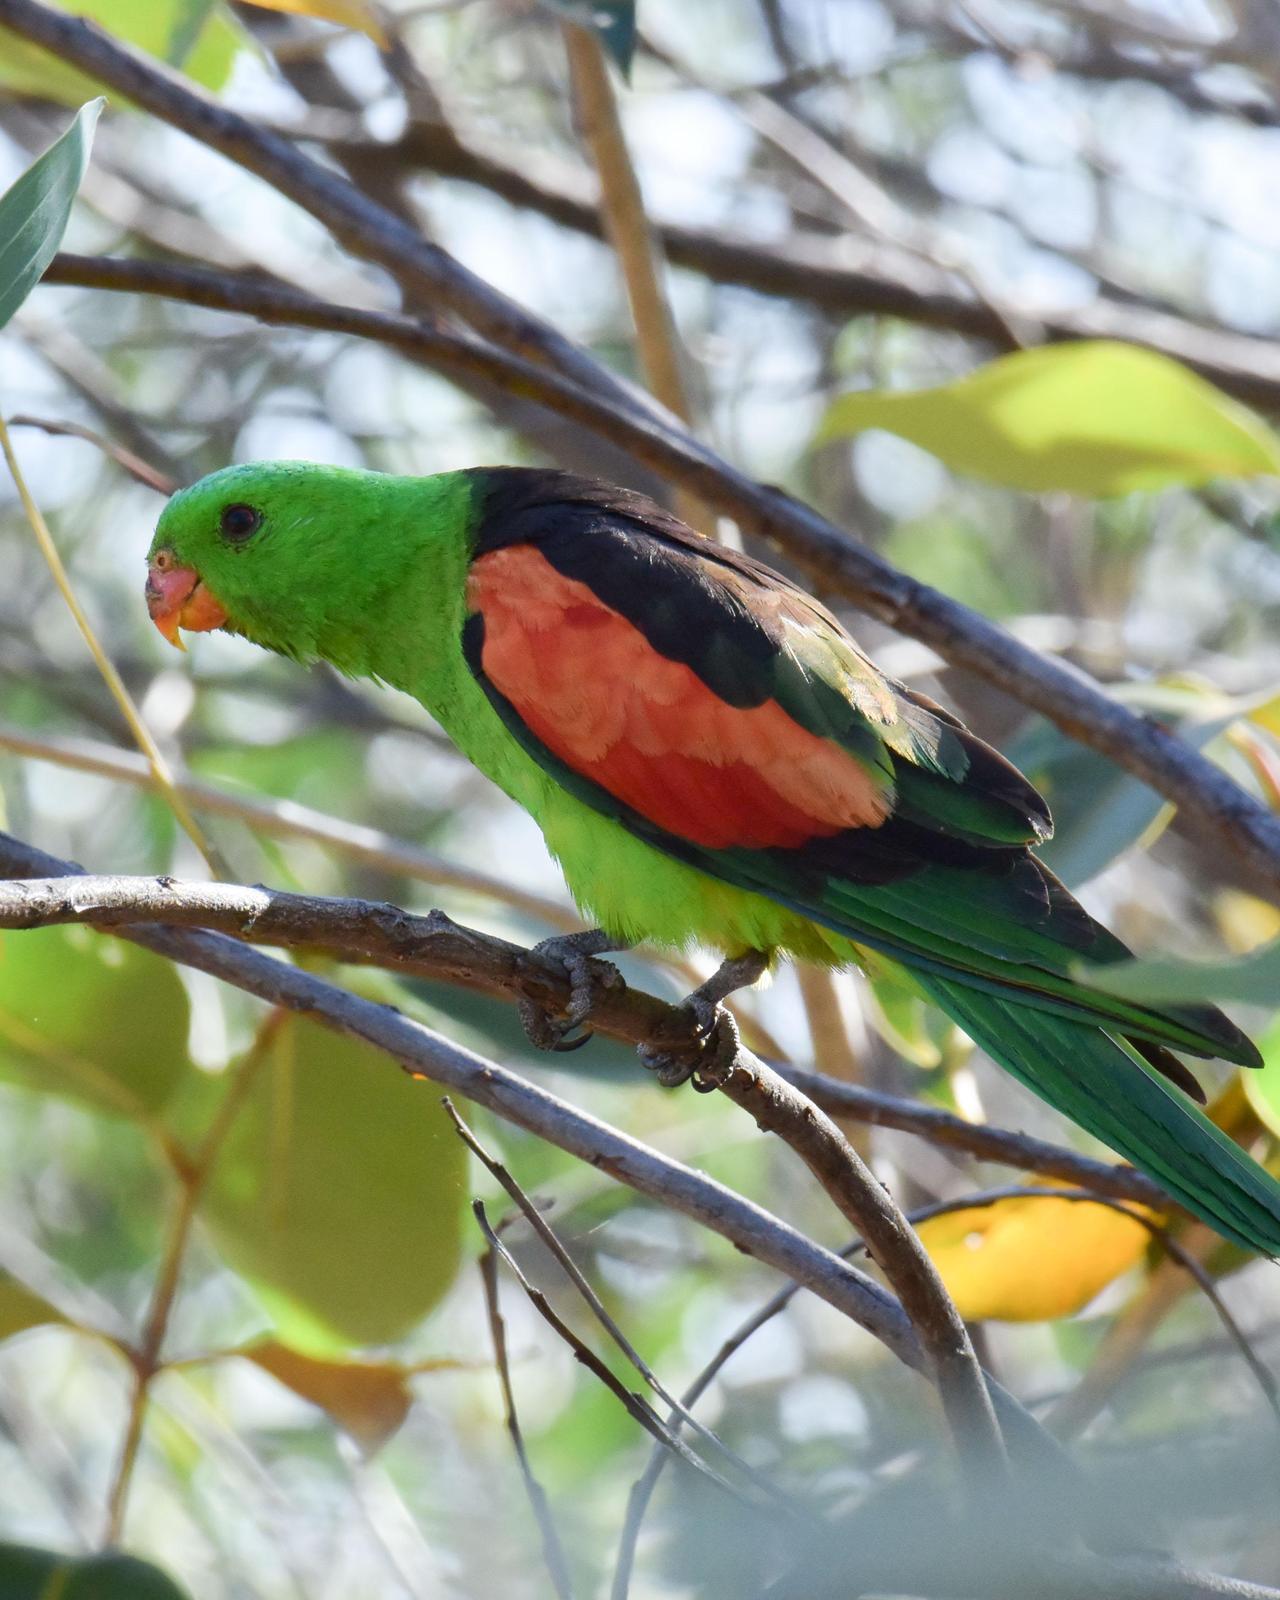 Red-winged Parrot Photo by Steve Percival